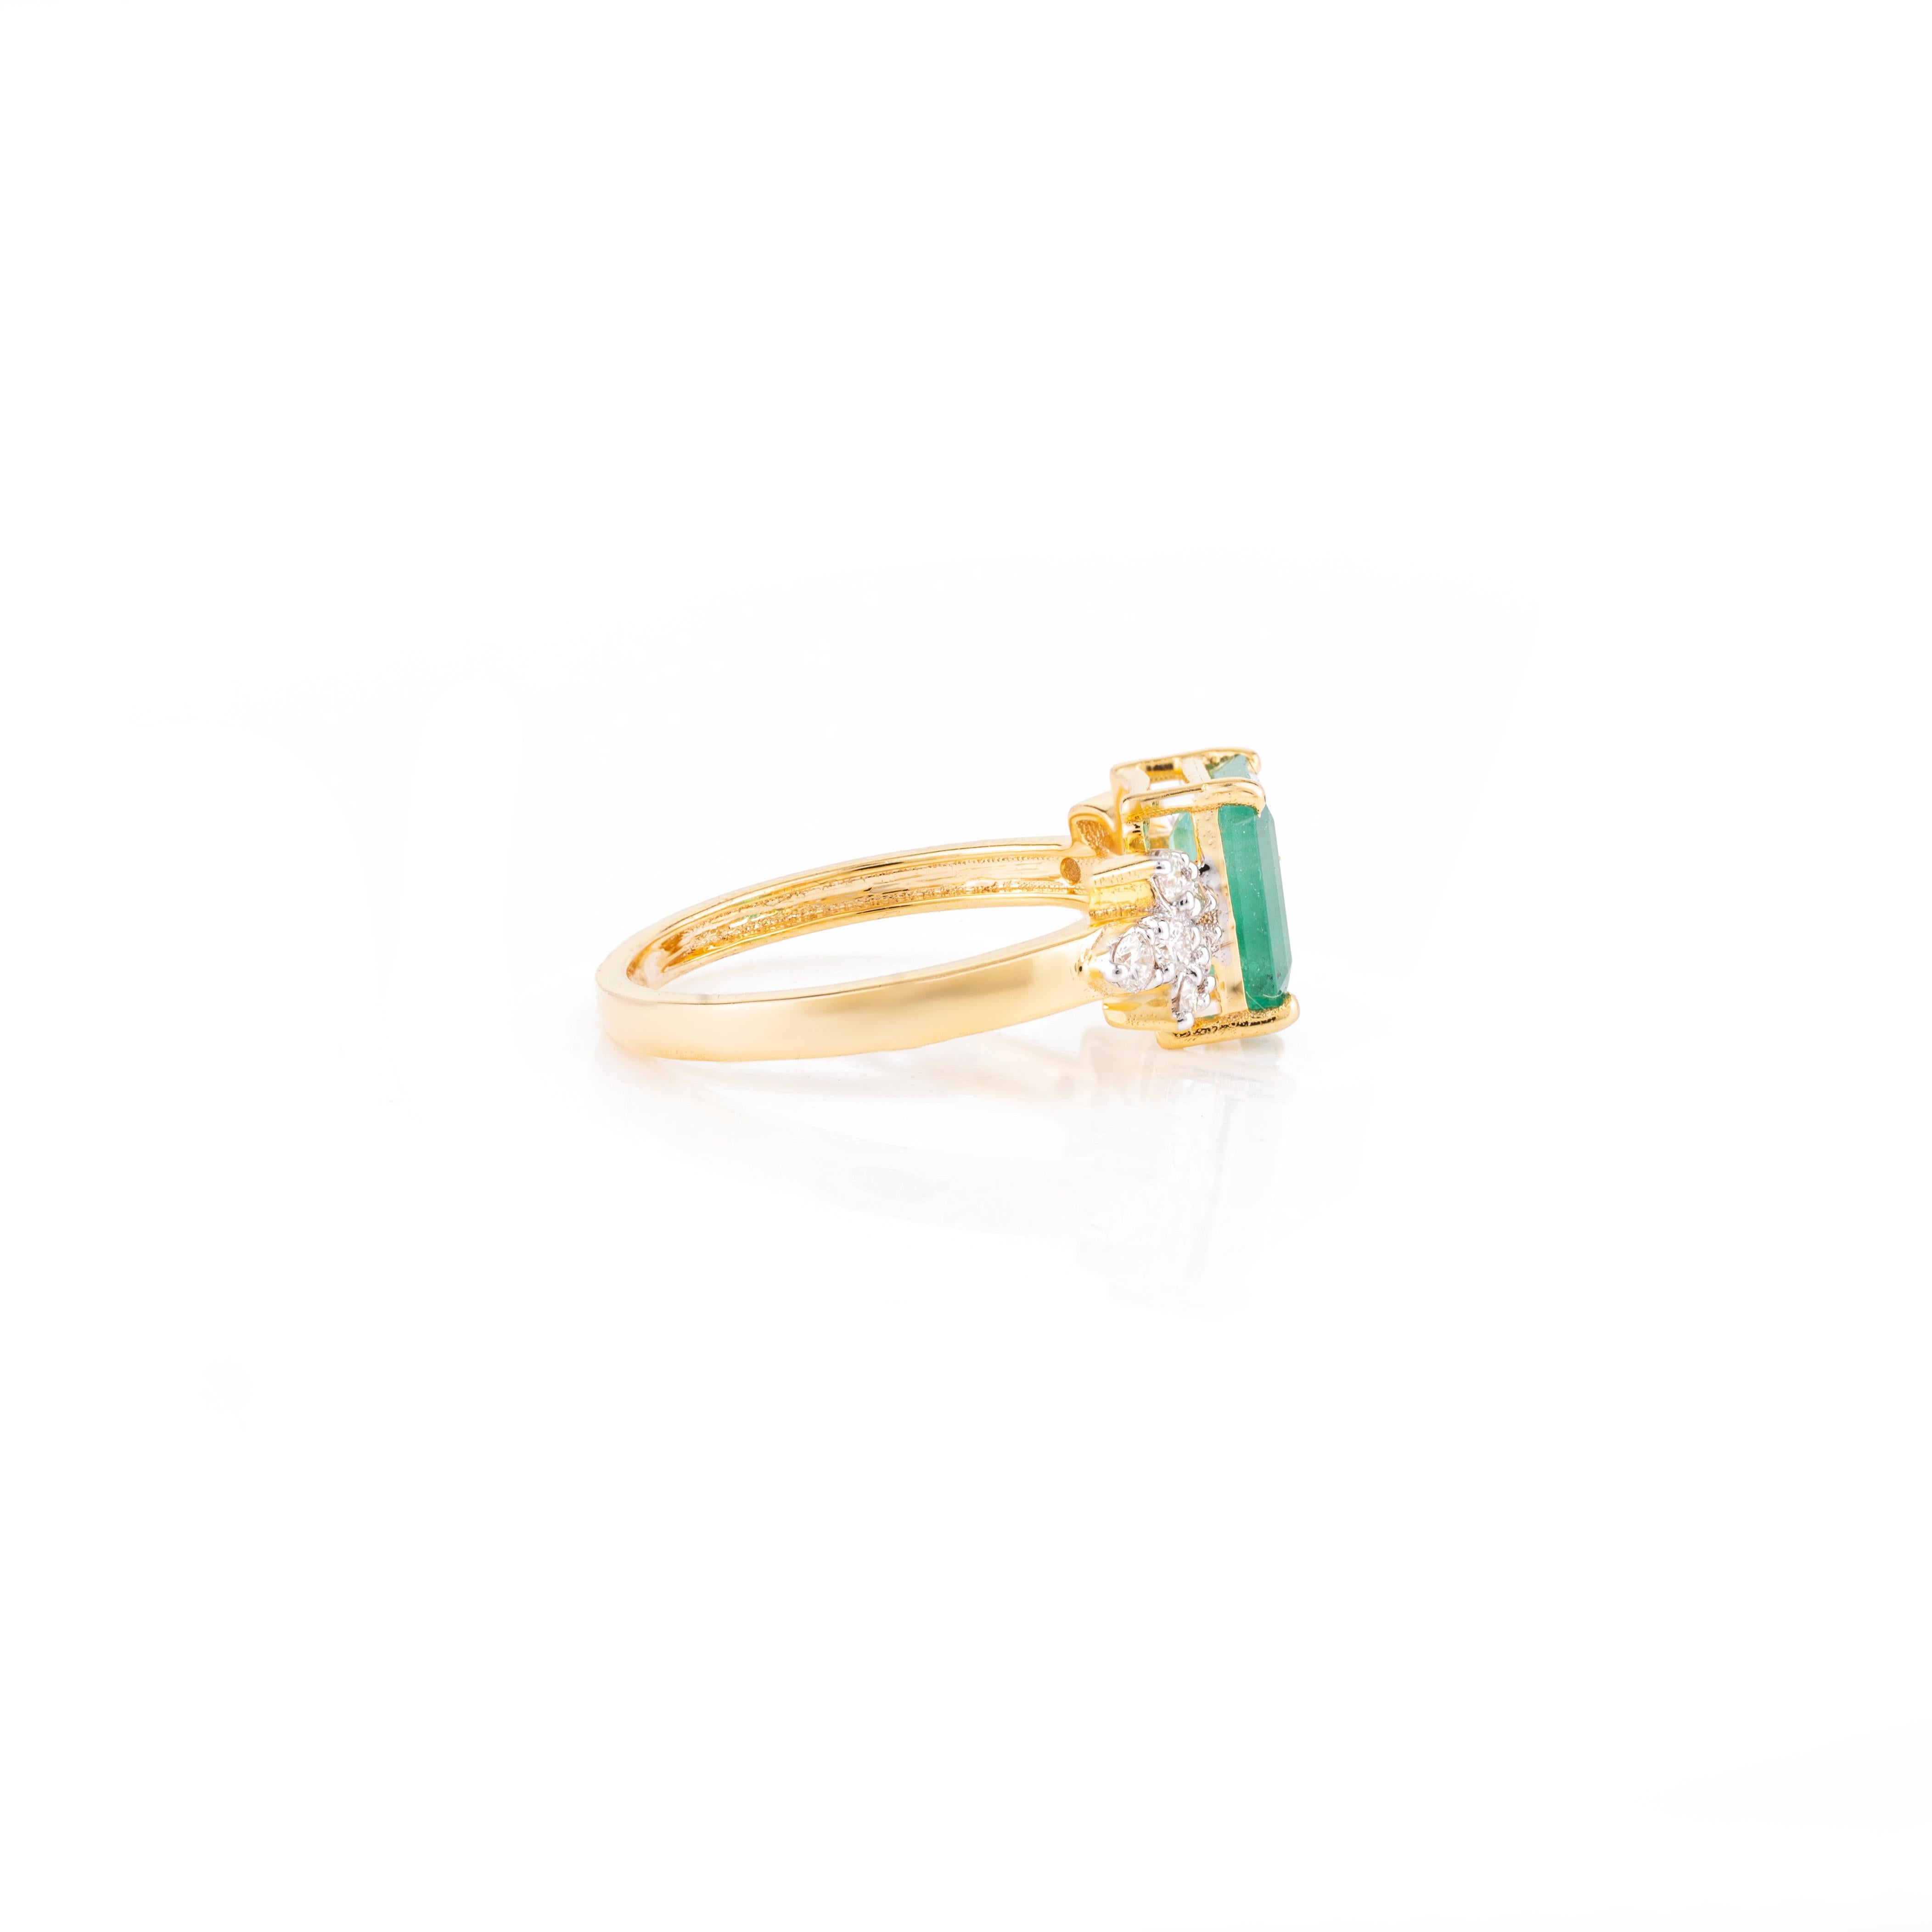 For Sale:  Natural May Birthstone Emerald Diamond 14k Yellow Gold Wedding Ring for Her 5